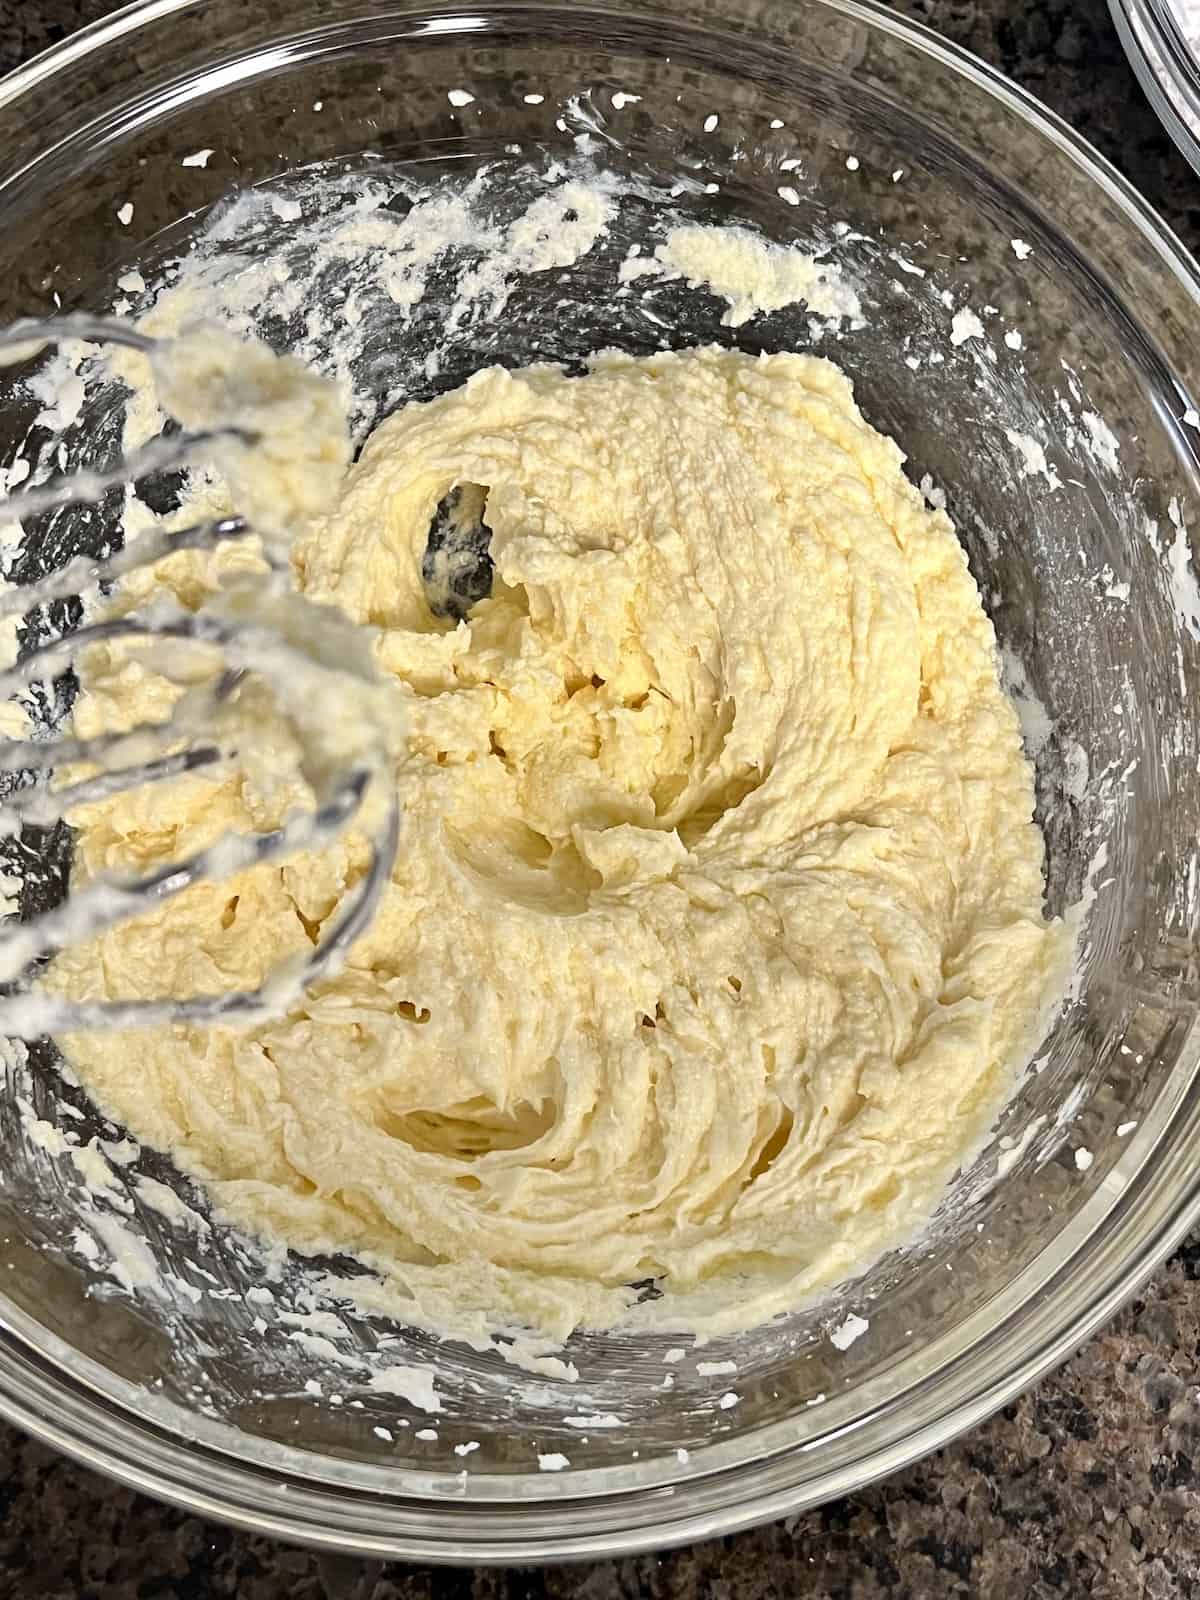 Creamed butter and sugar in a bowl.